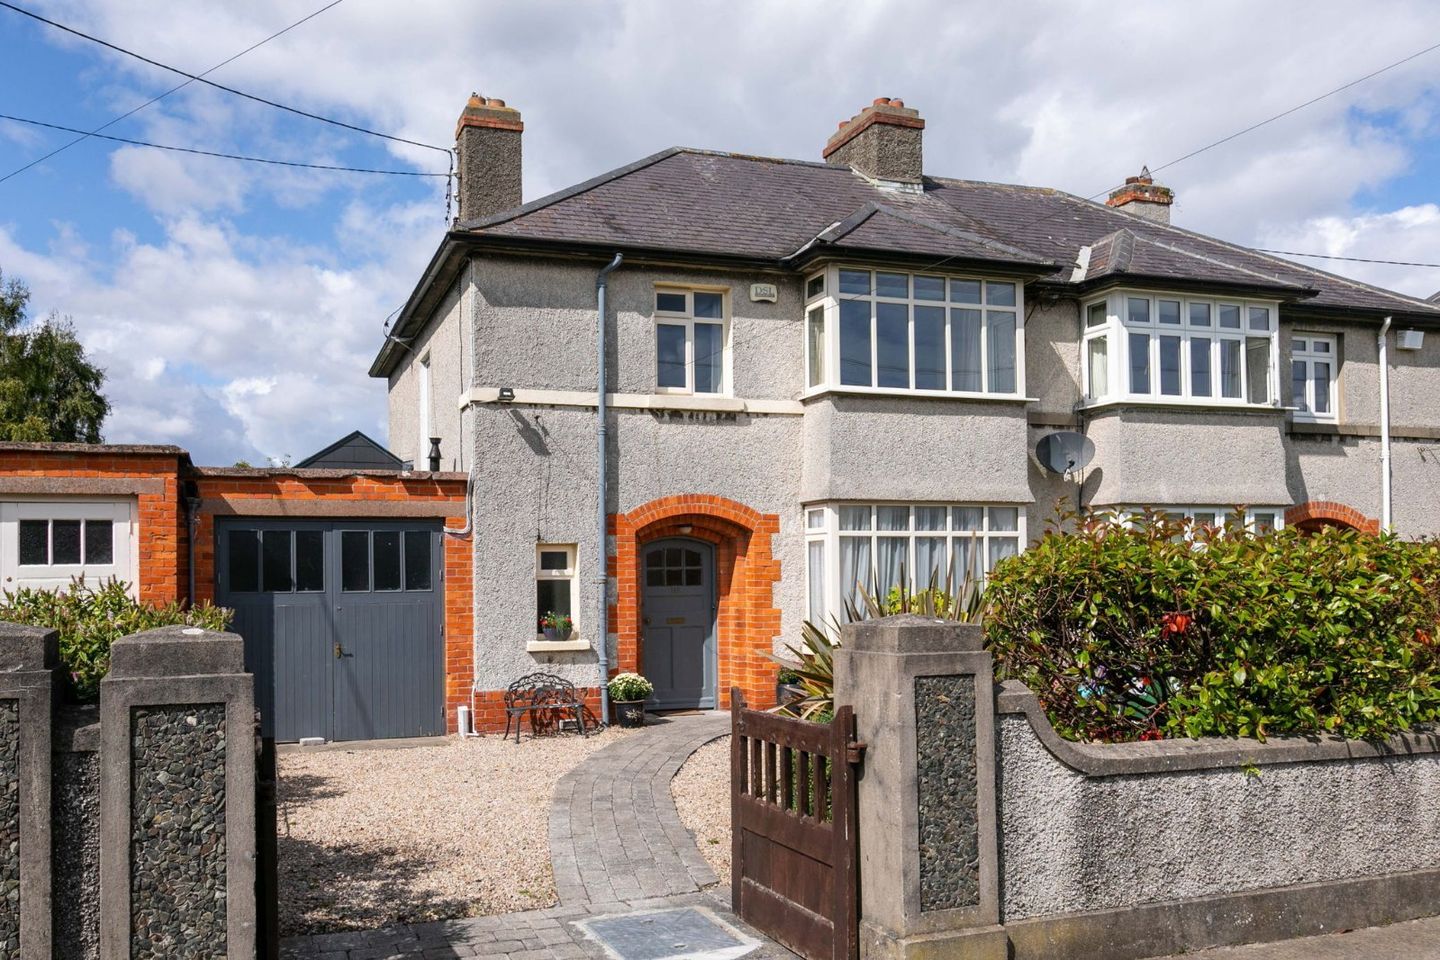 115 St Helens Road, Booterstown, Co. Dublin, A94FN82